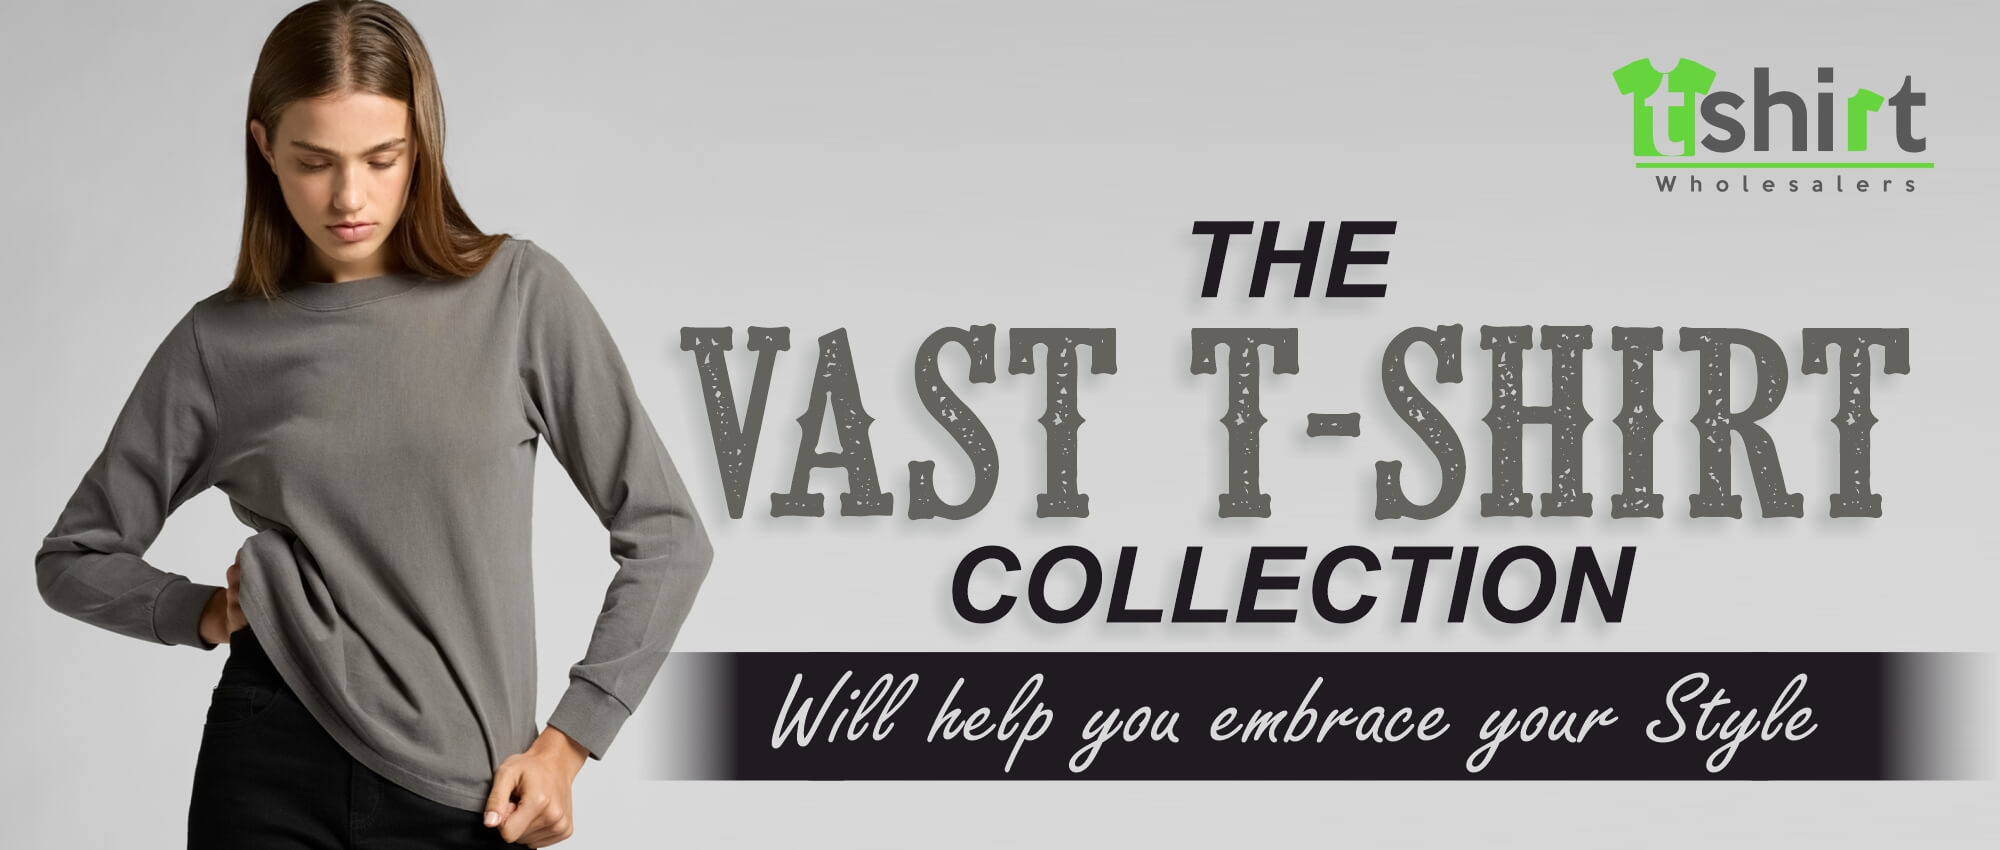 THE VAST T-SHIRT COLLECTION WILL HELP YOU EMBRACE YOUR STYLE